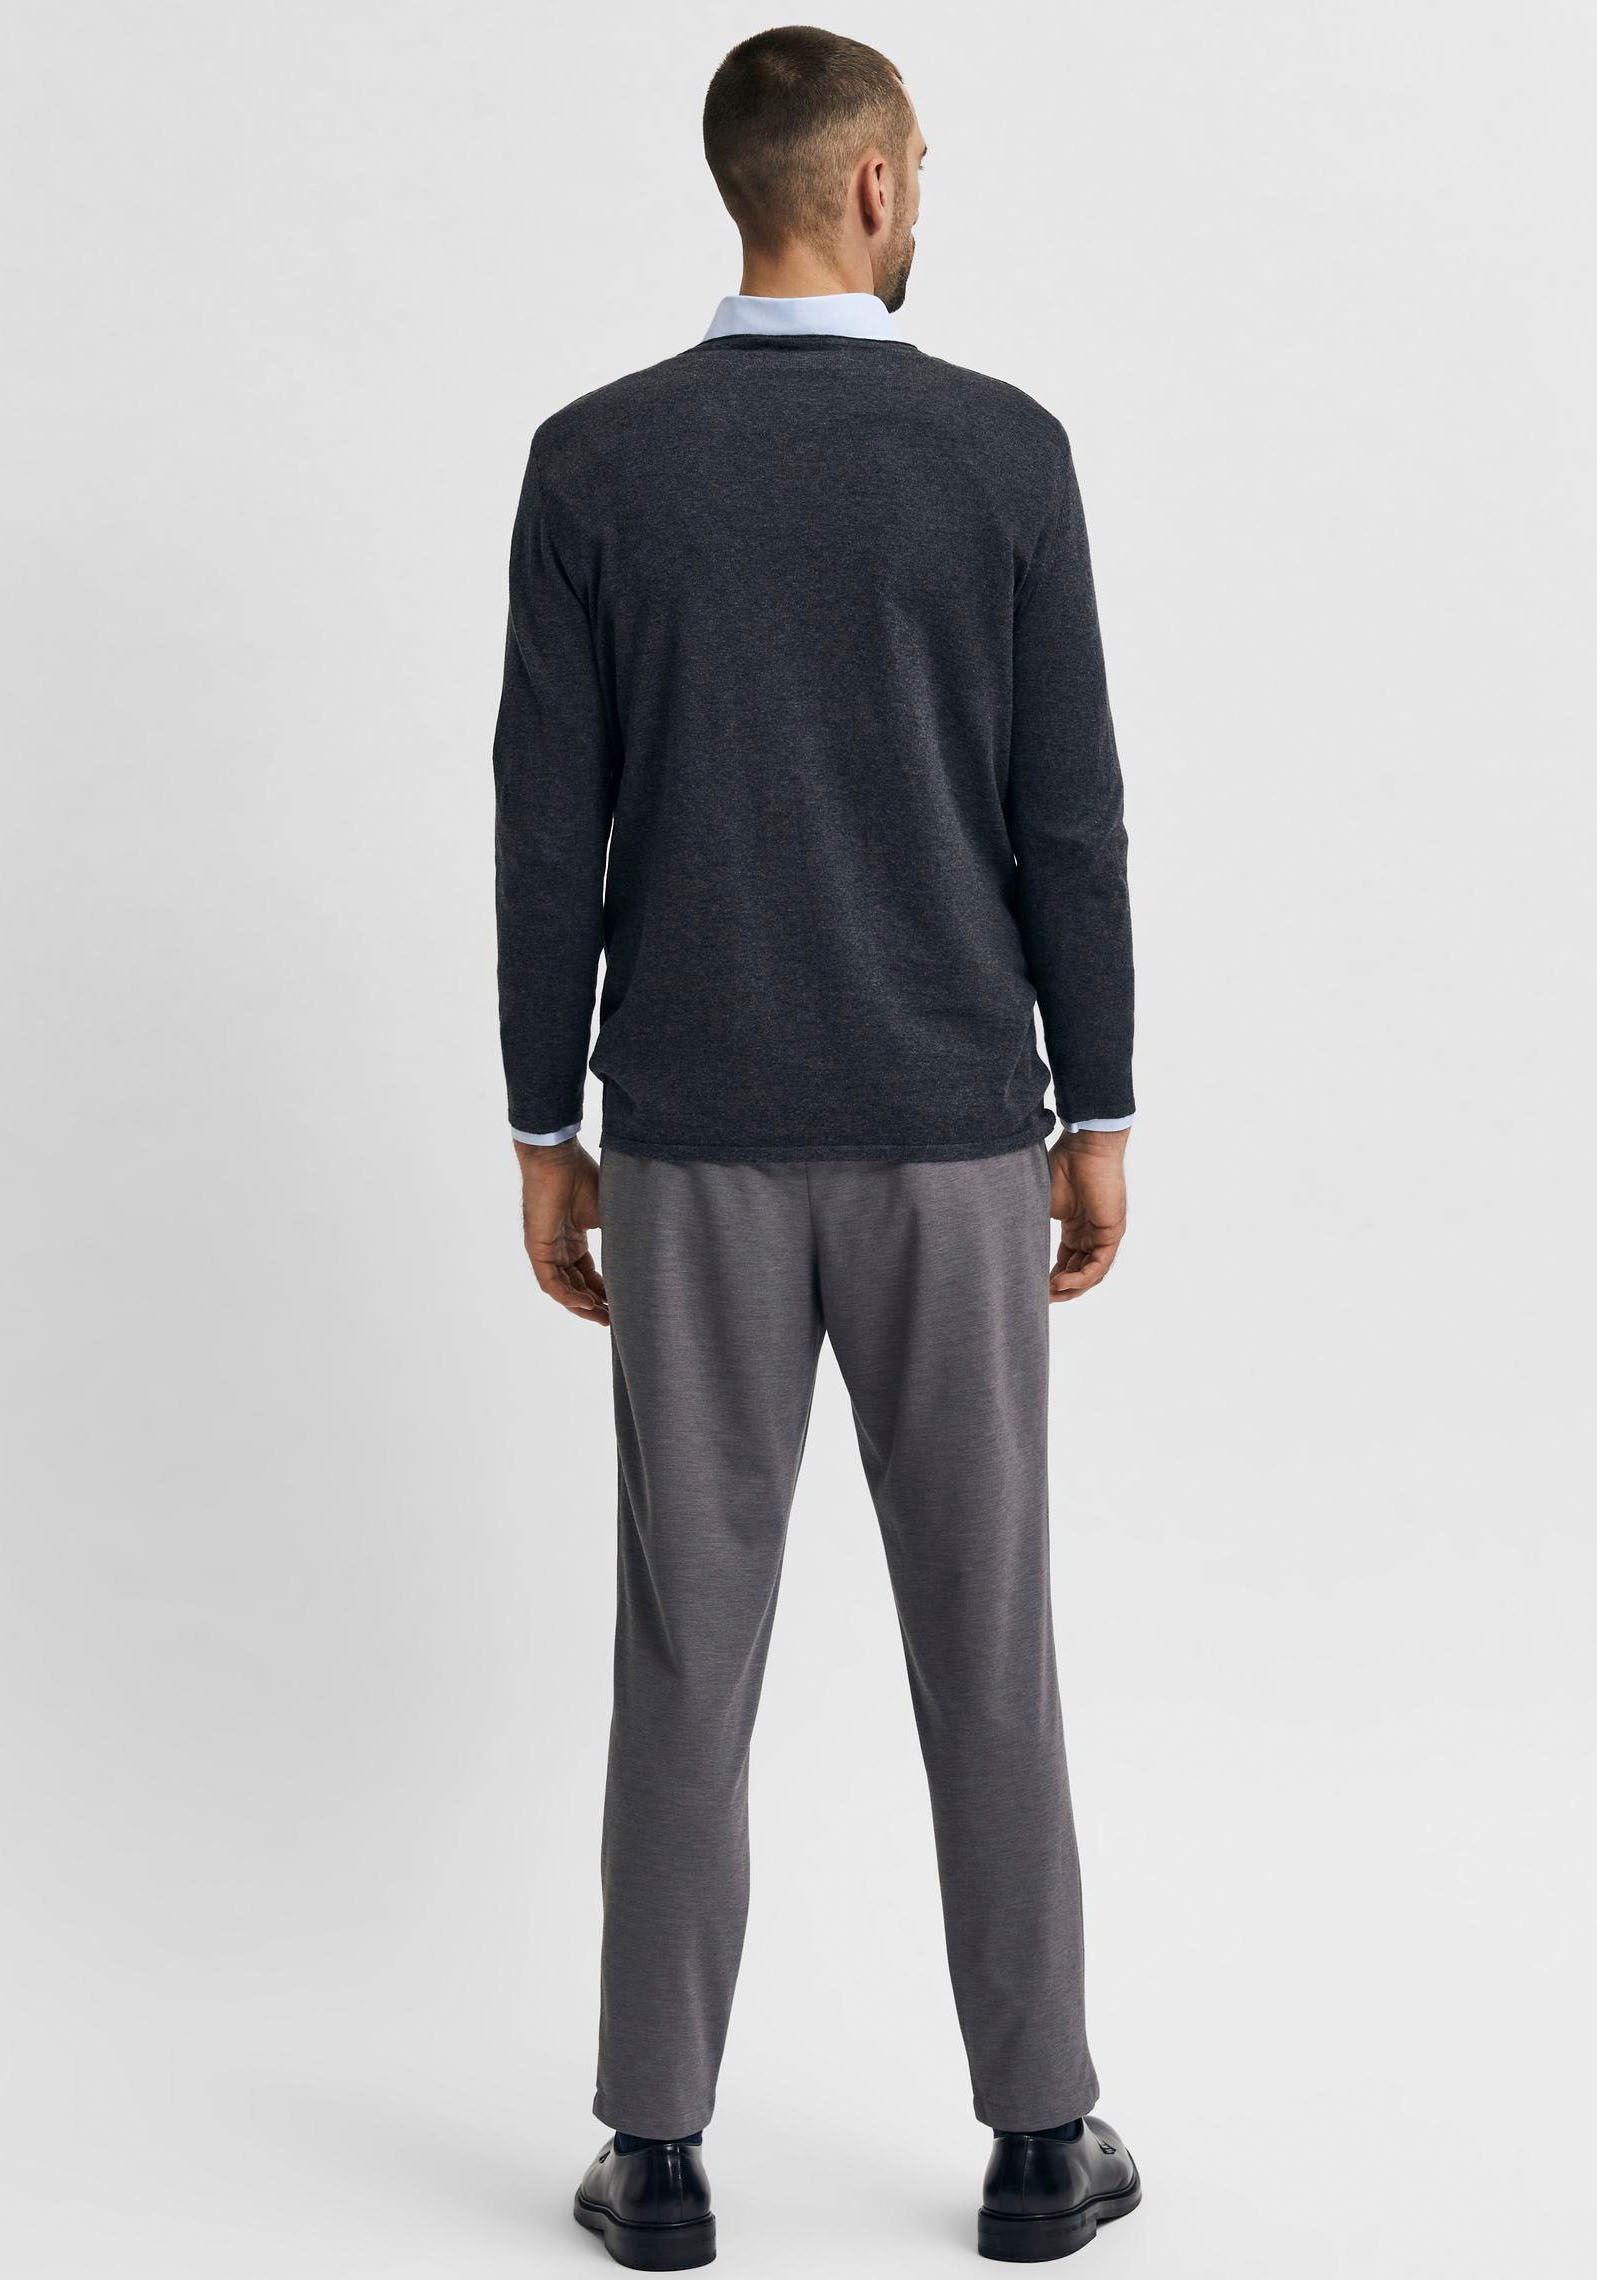 SELECTED HOMME Rundhalspullover »ROME KNIT« online shoppen bei OTTO